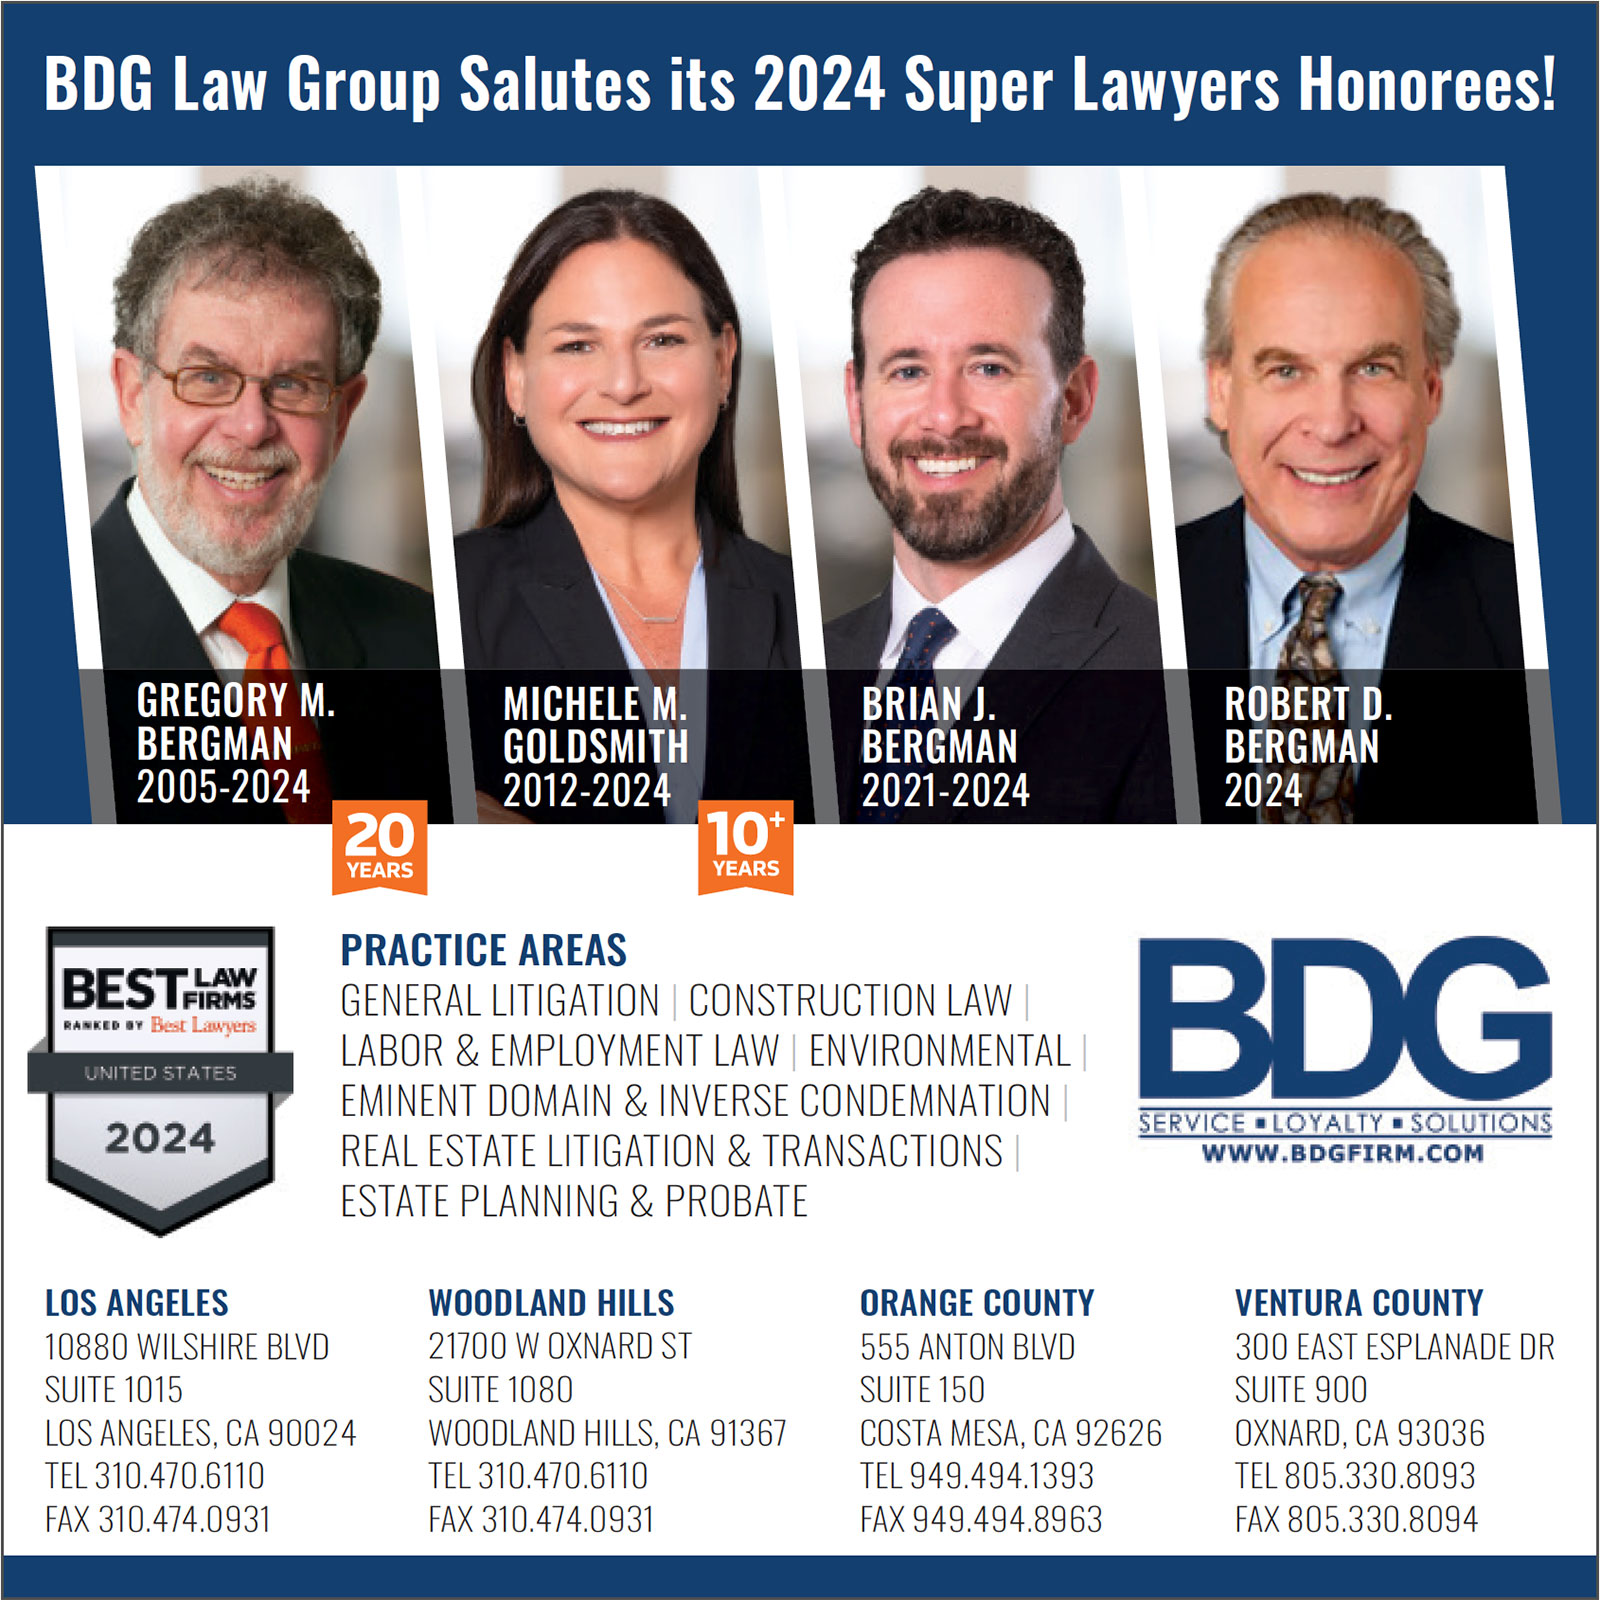 BDG Law Group Salutes its 2024 Super Lawyer Honorees!